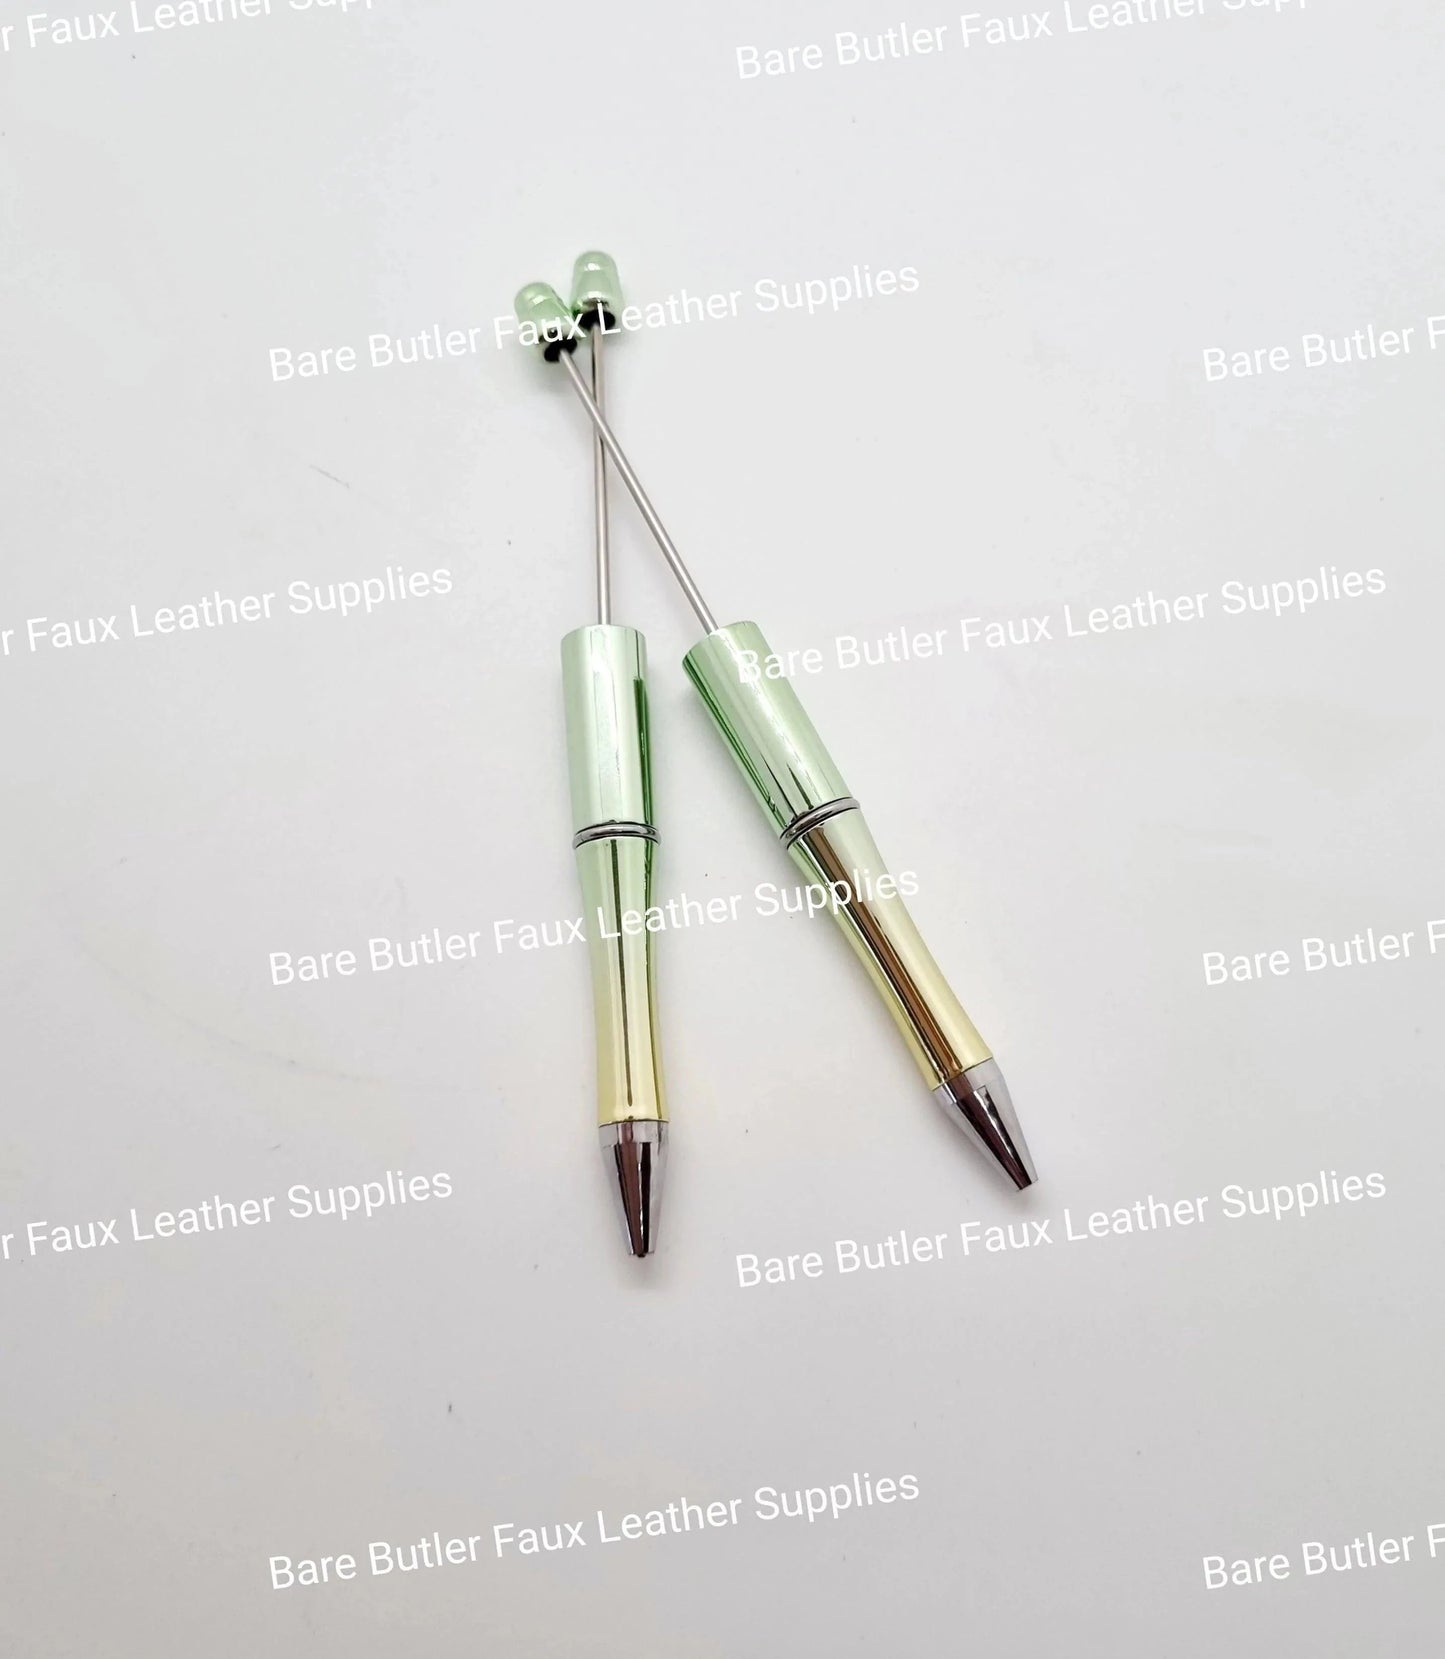 Green Ombre Metallic Bead Pen Blanks 2 pack -  - Bare Butler Faux Leather Supplies 